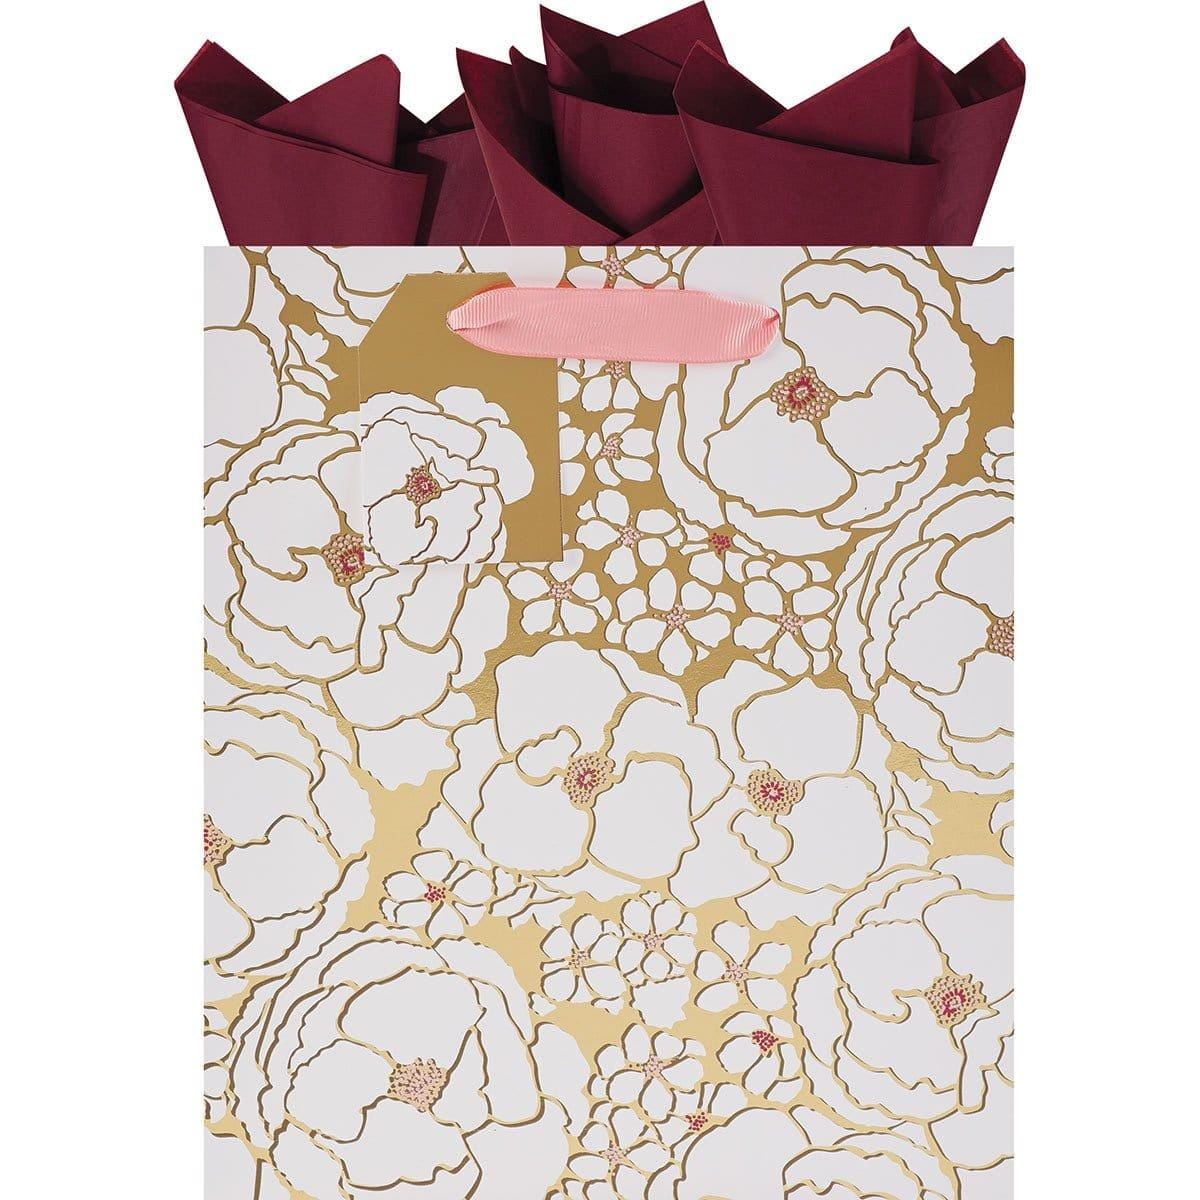 Buy Gift Wrap & Bags Gift Bag Medium 10 In. - Golden Bliss sold at Party Expert